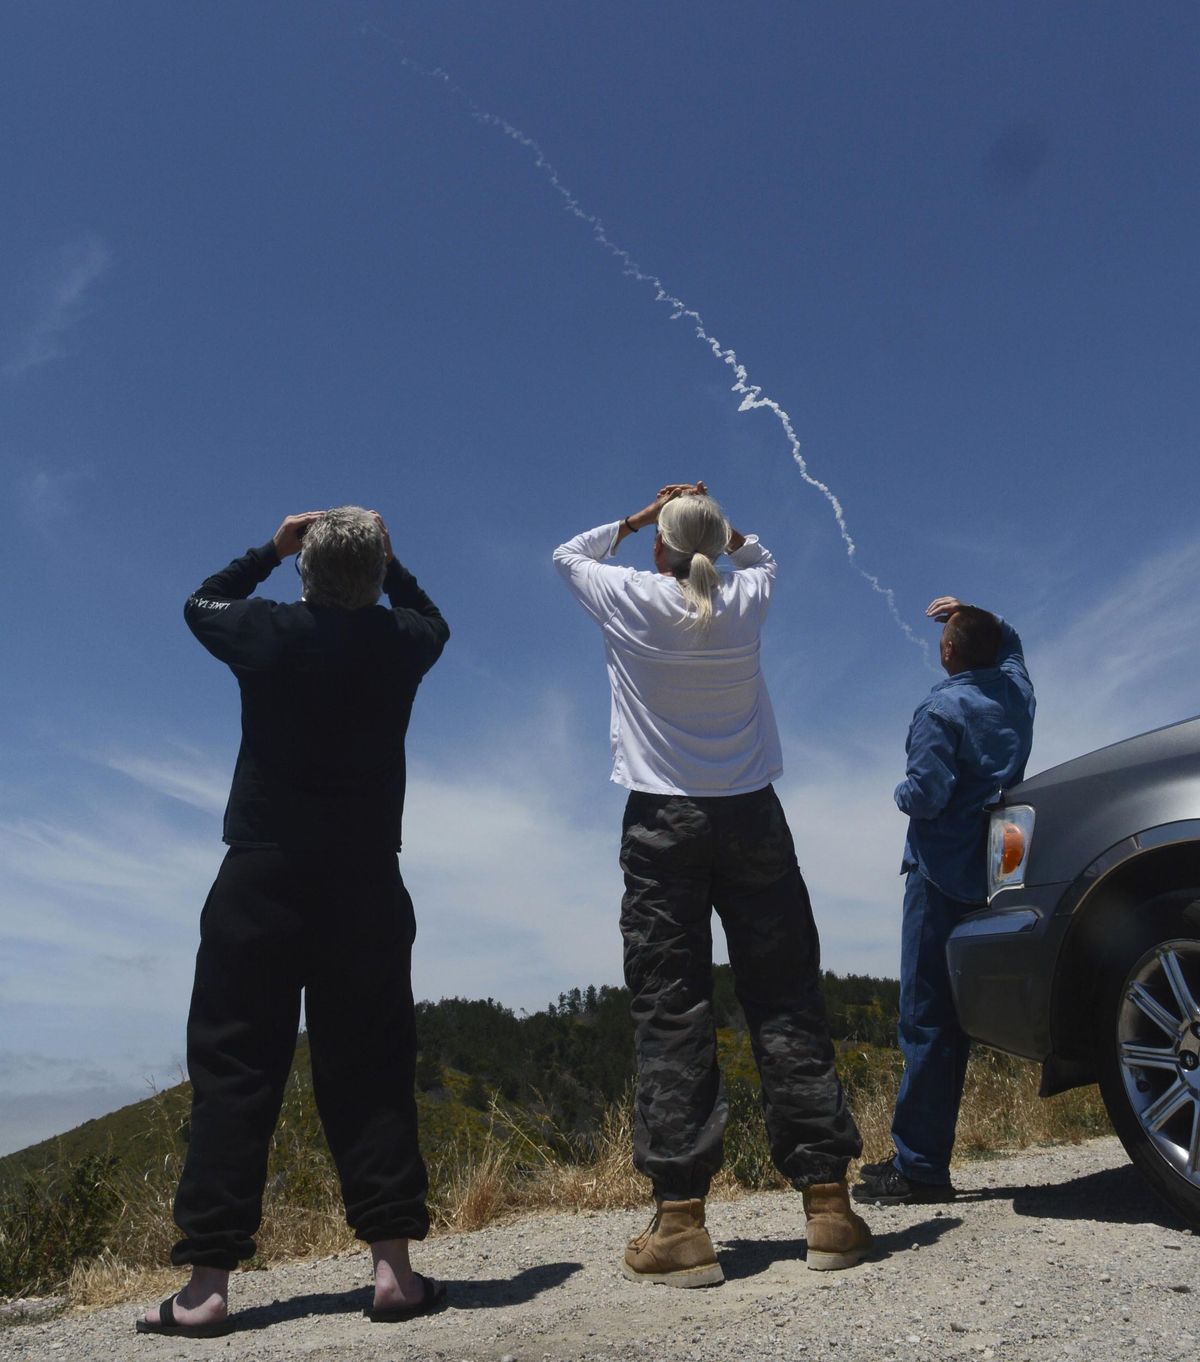 From Harris Grade Road north of Lompoc, Calif., spectators watch an interceptor missile launch from an underground silo at Vandenberg Air Force Base, and fly toward an intercontinental-range missile fired from a test range on Kwajalein Atoll in the Pacific. Hit or miss, the Pentagon